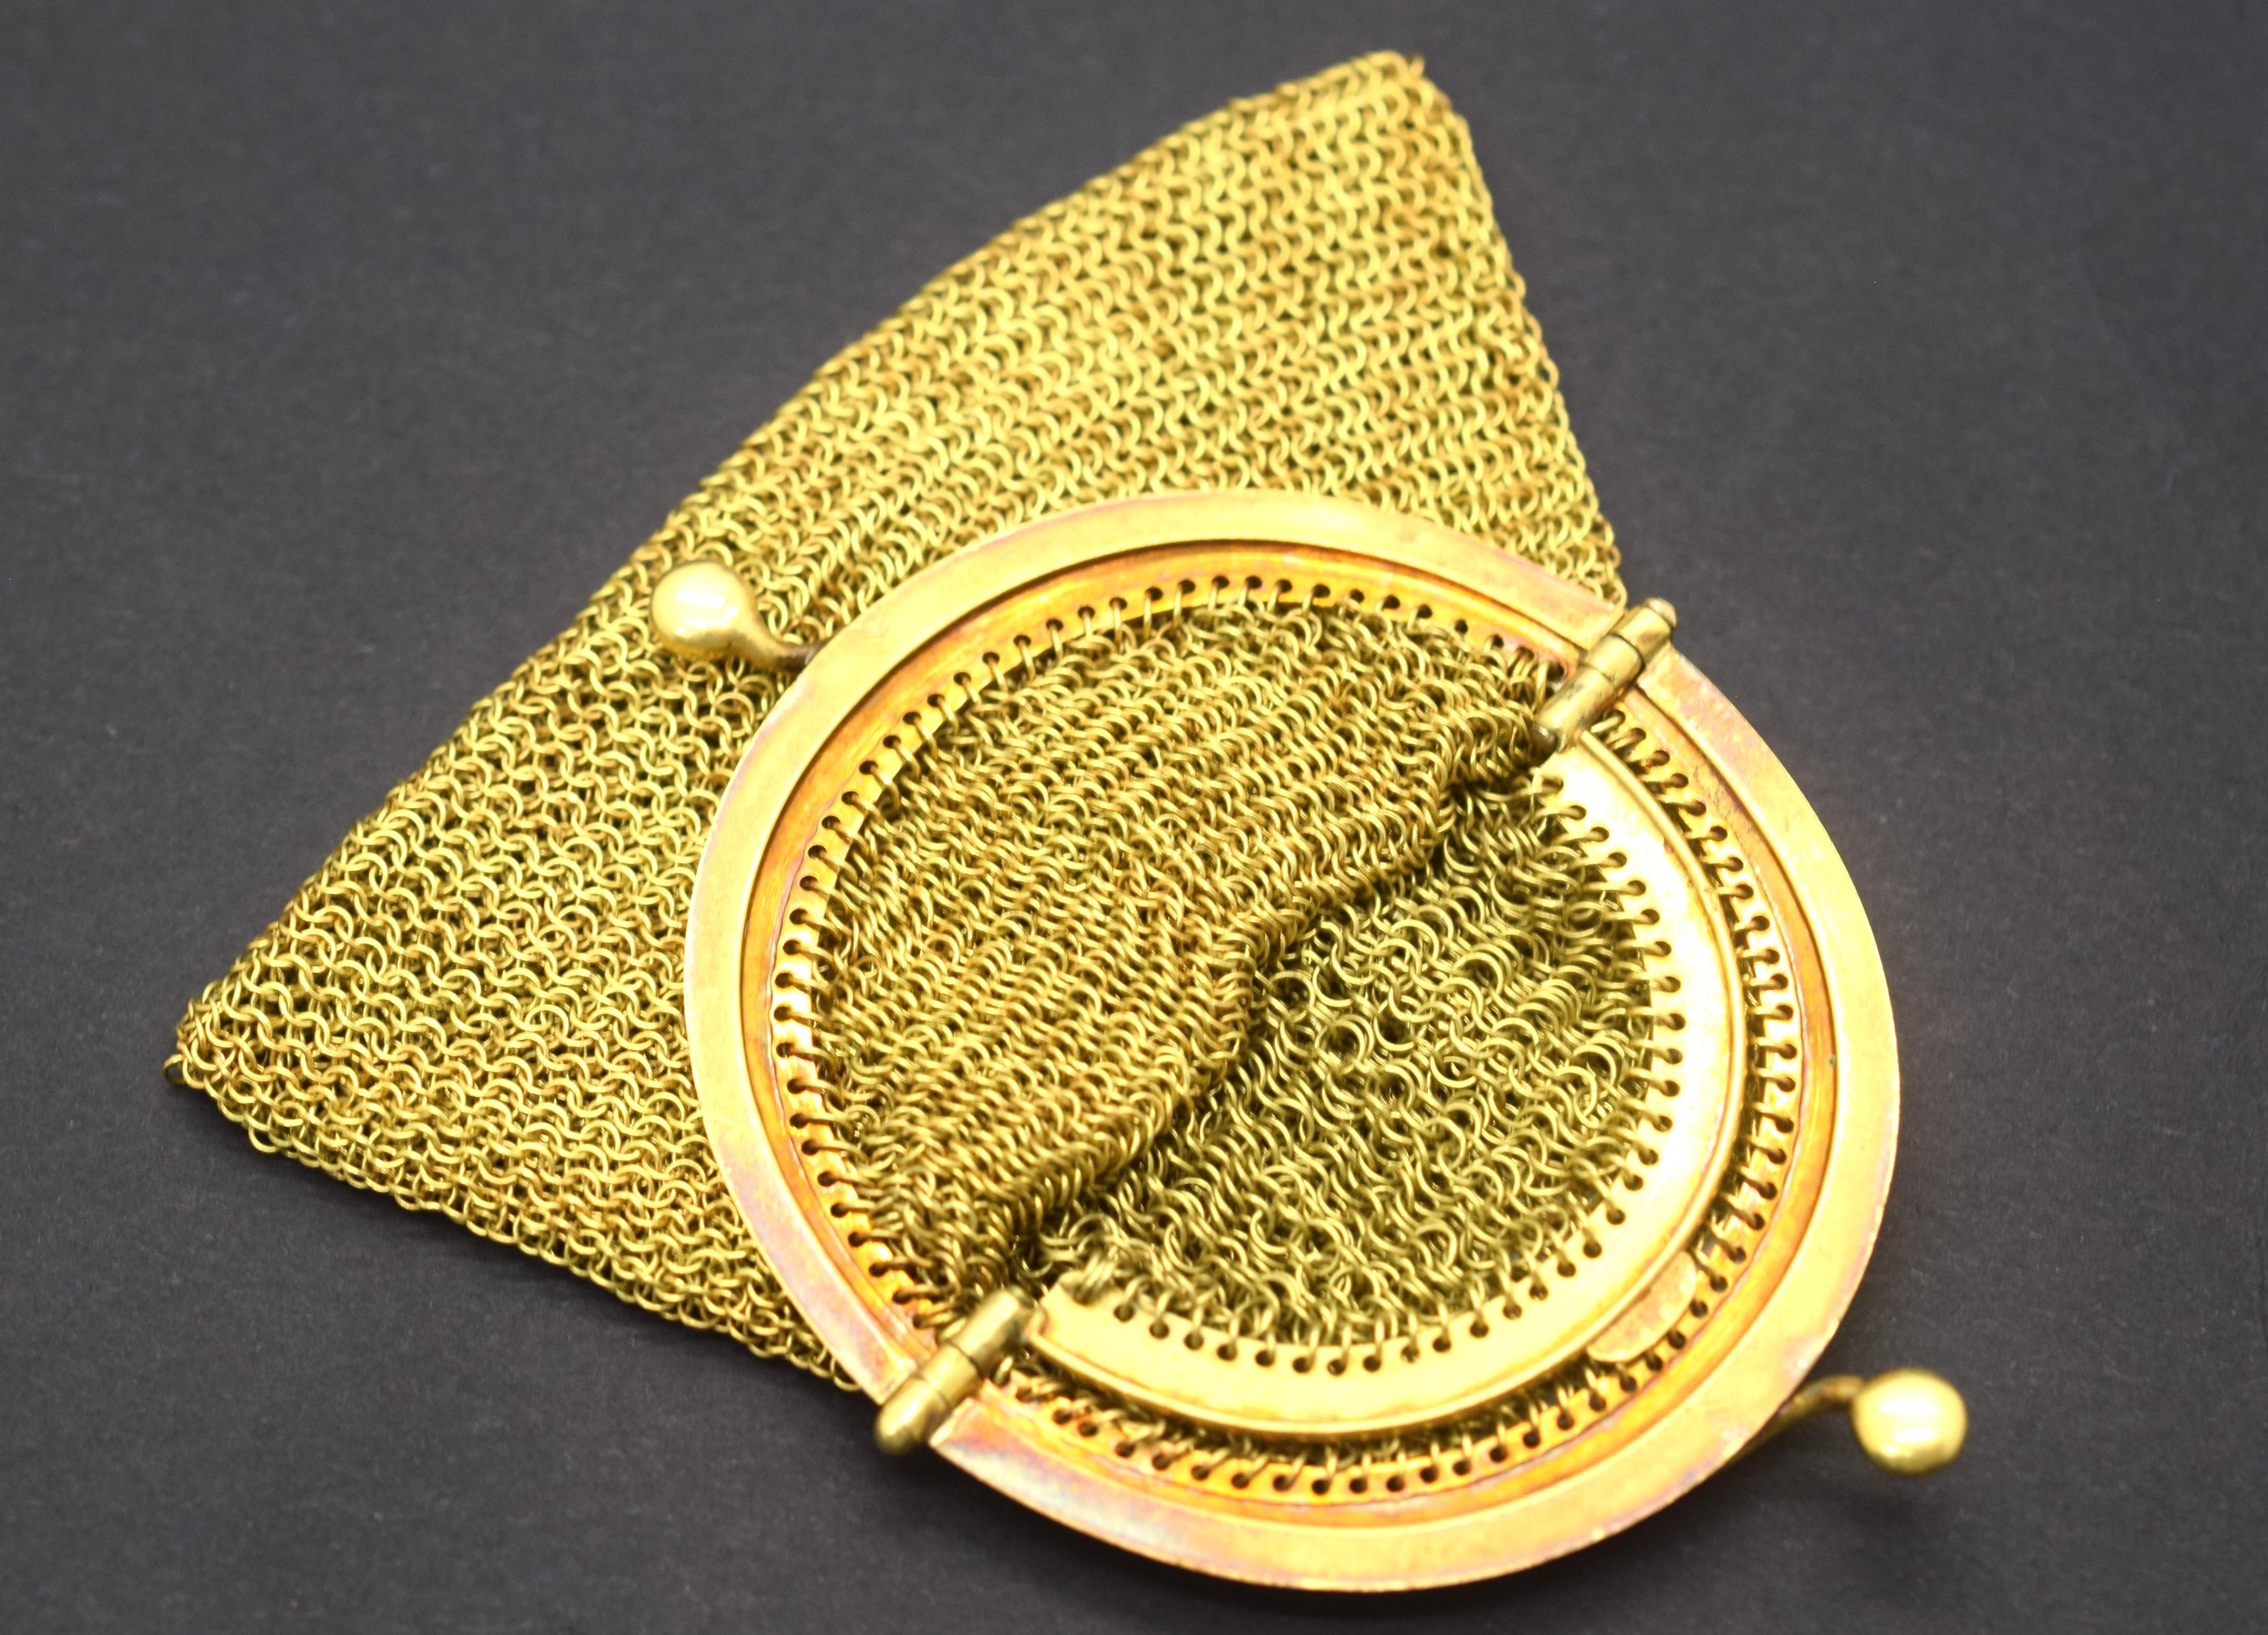 Gorgeous Tiffany & Co. vintage mesh purse crafted in 18k yellow gold. This unique item is truly one of a kind. The purse is crafted out of solid 18k yellow gold. The purse has a hinge opening with a dual separated compartment inside. The condition